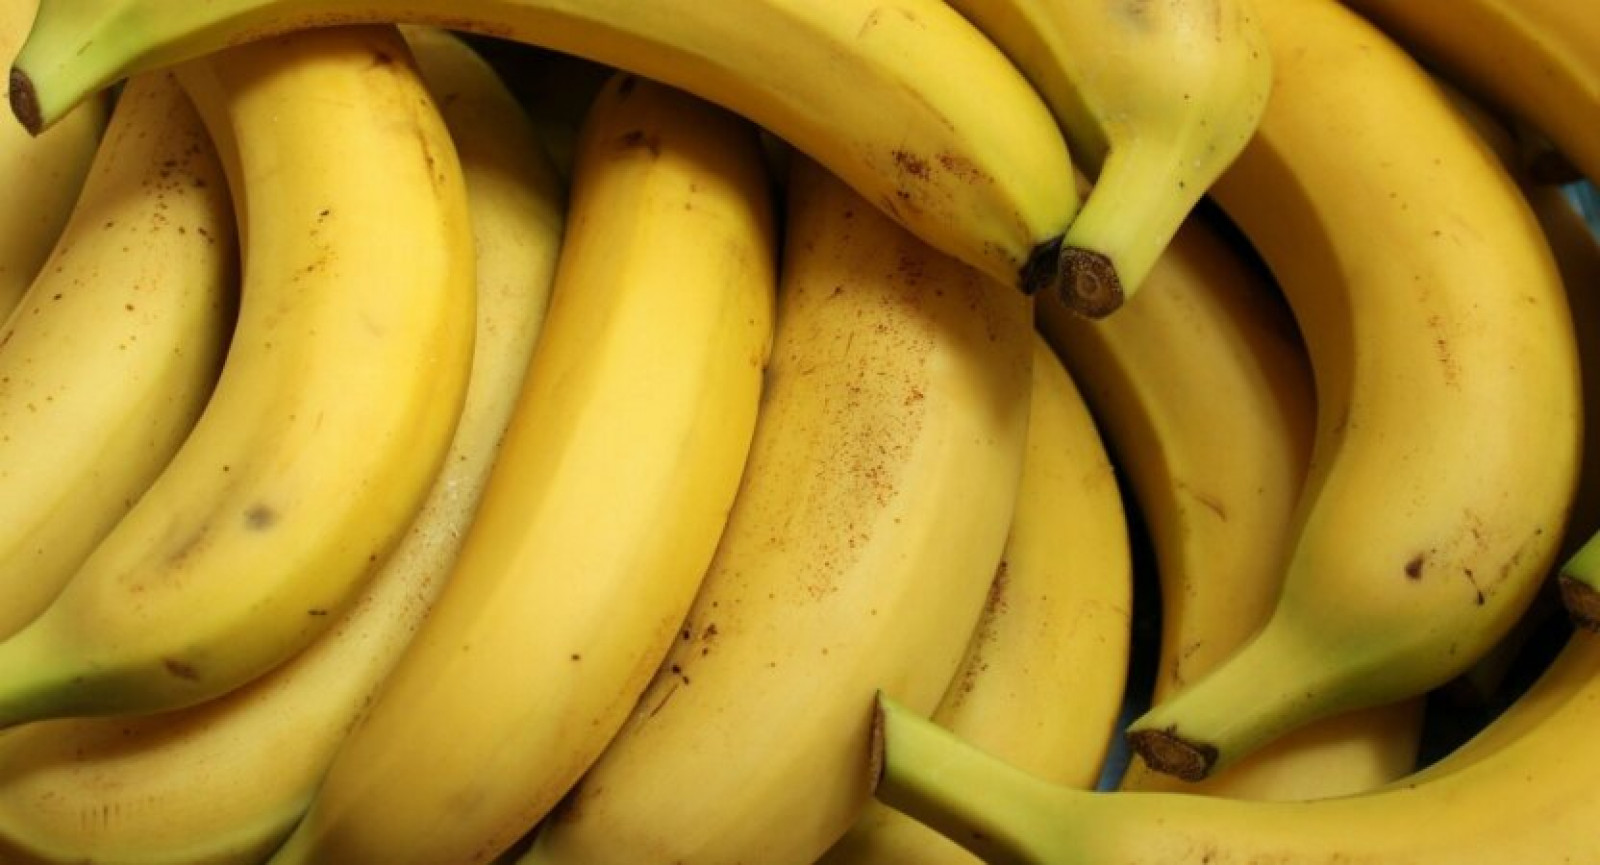 How Bad are Bananas? The Carbon Footprint of Everything by Mike Berners- Lee